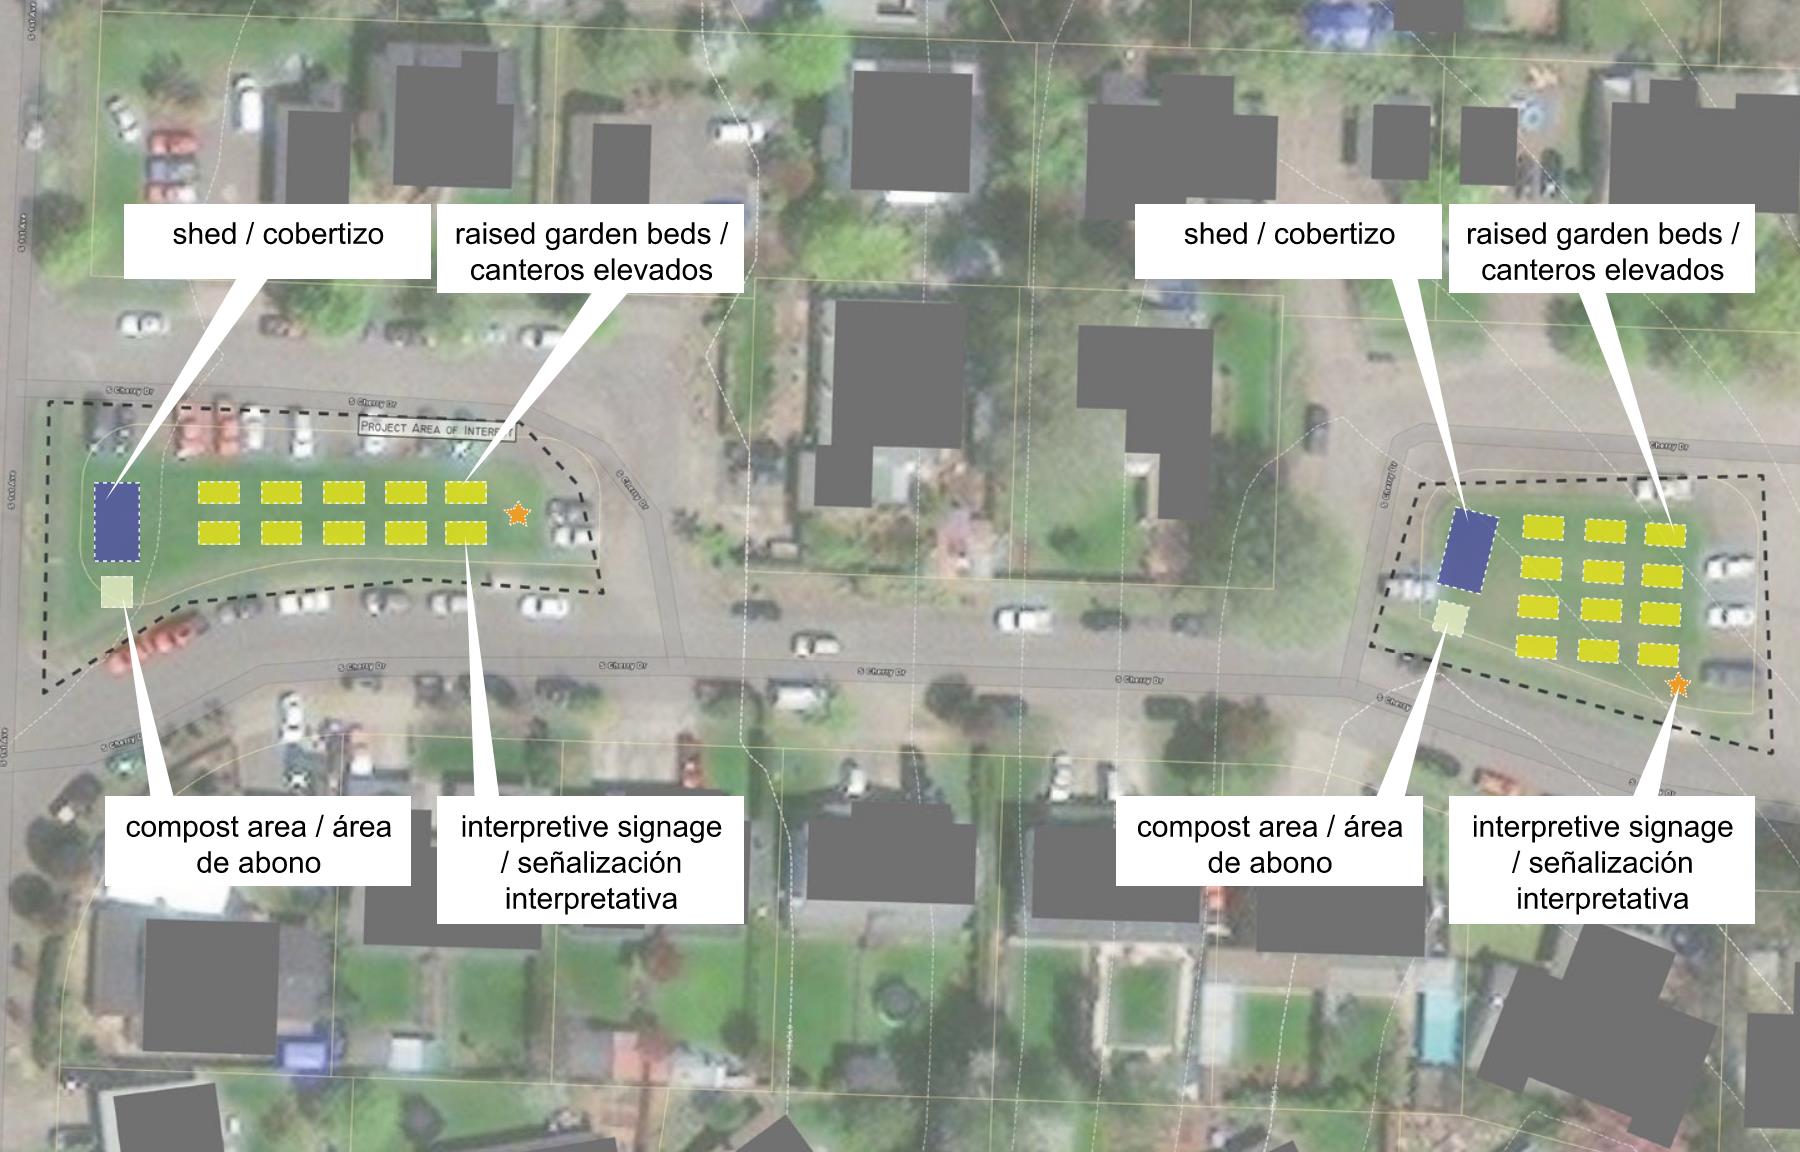 Image alt text: New neighborhood gardens are proposed In the two islands on Cherry Street off South 4th Ave. Both islands will have rows of raised garden beds with a tool shed and compost area on the west side and interpretive signage on the east side. The existing parking around the islands will remain.